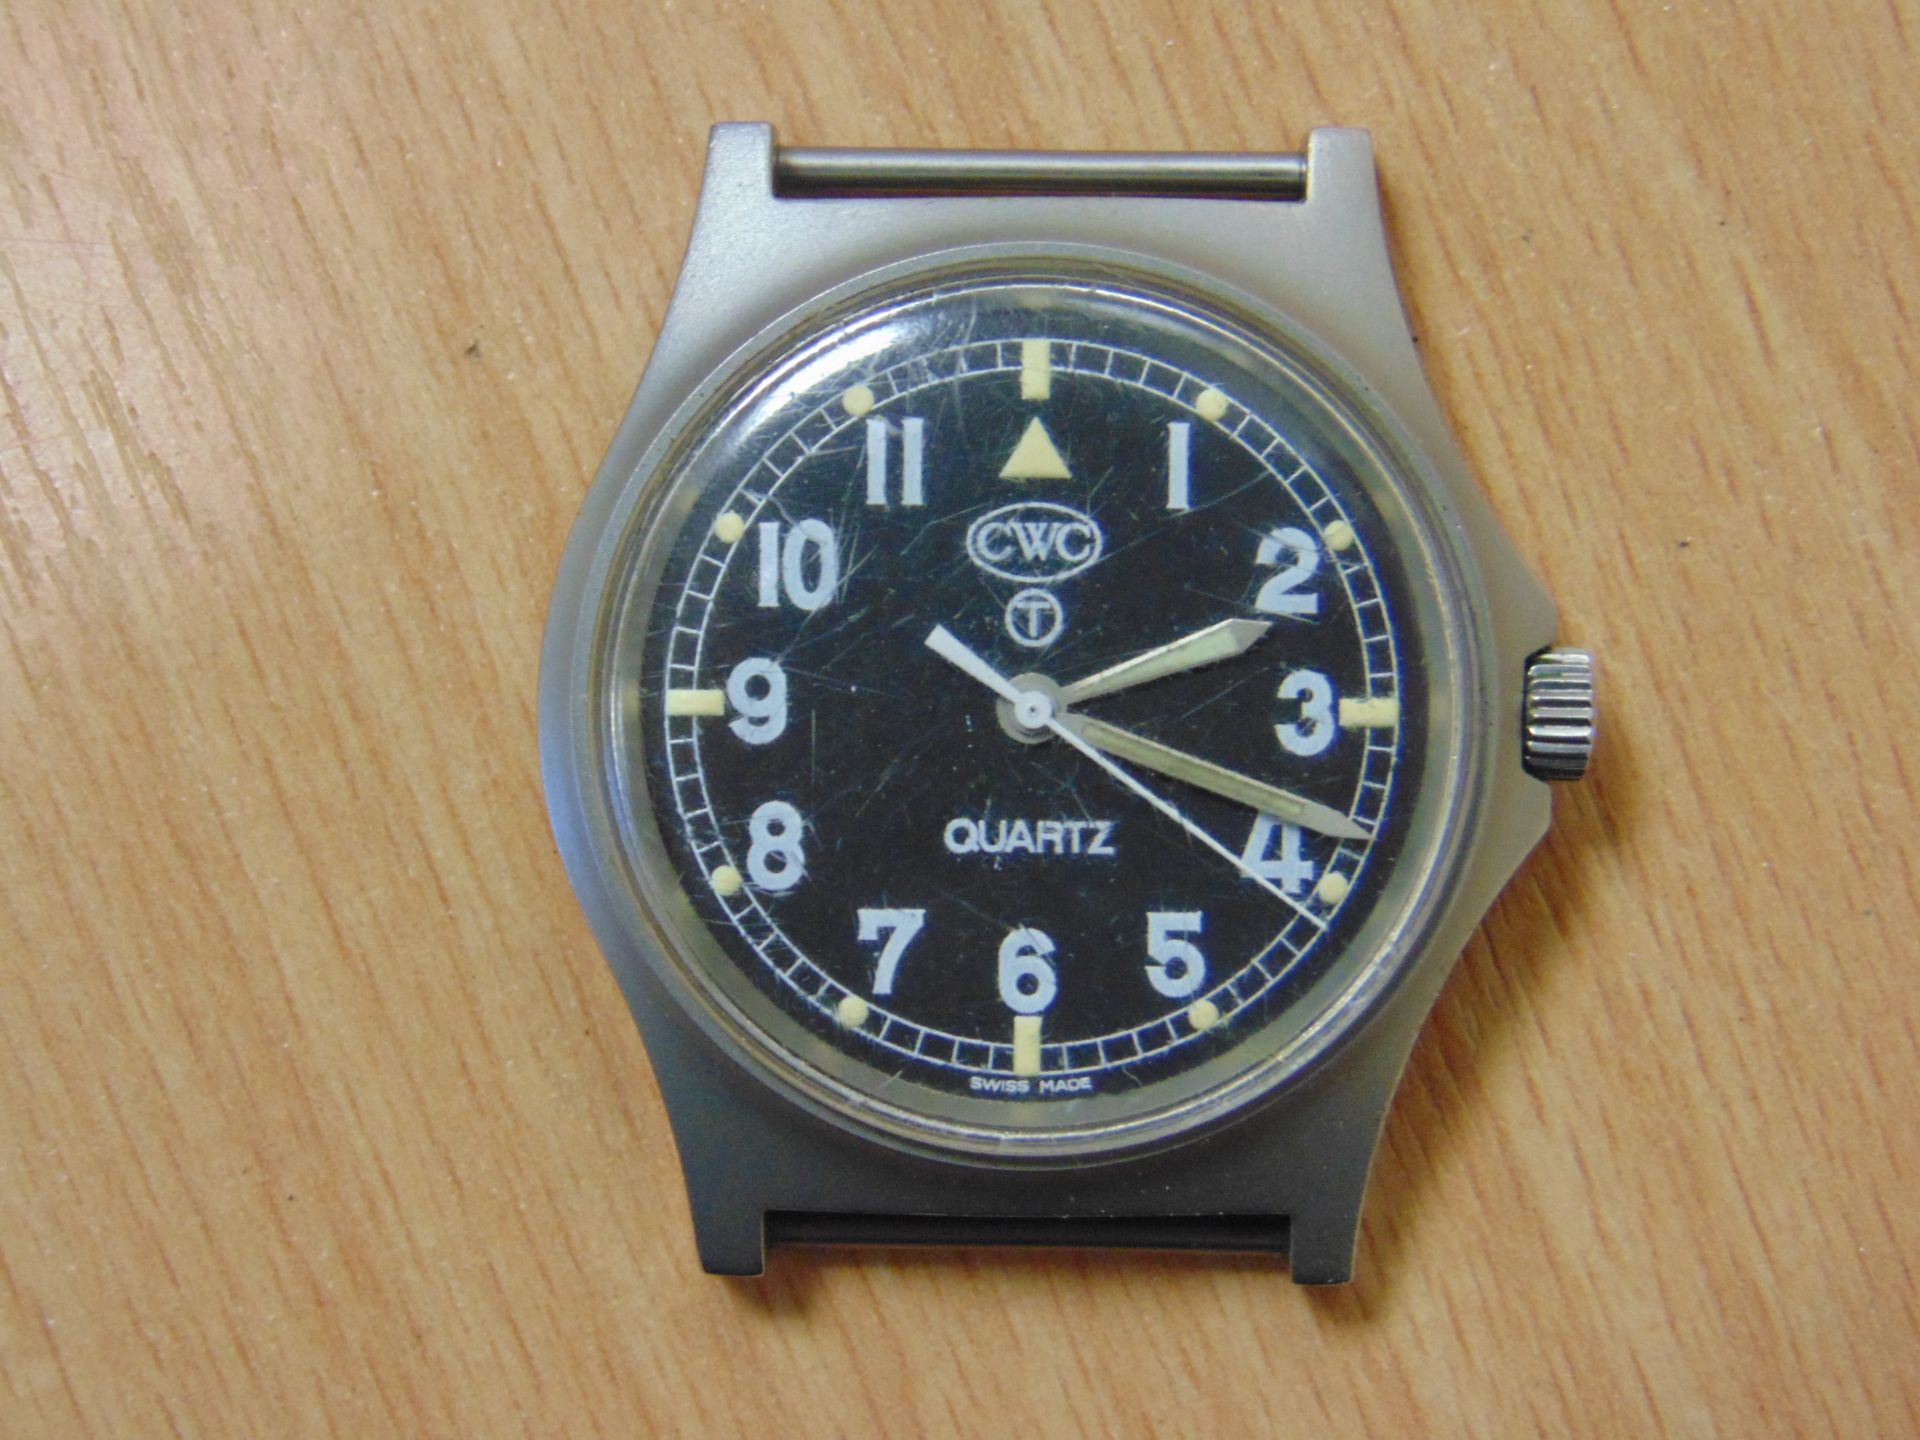 CWC W10 SERVICE WATCH NATO NUMBERS DATE 1997 - Image 4 of 7